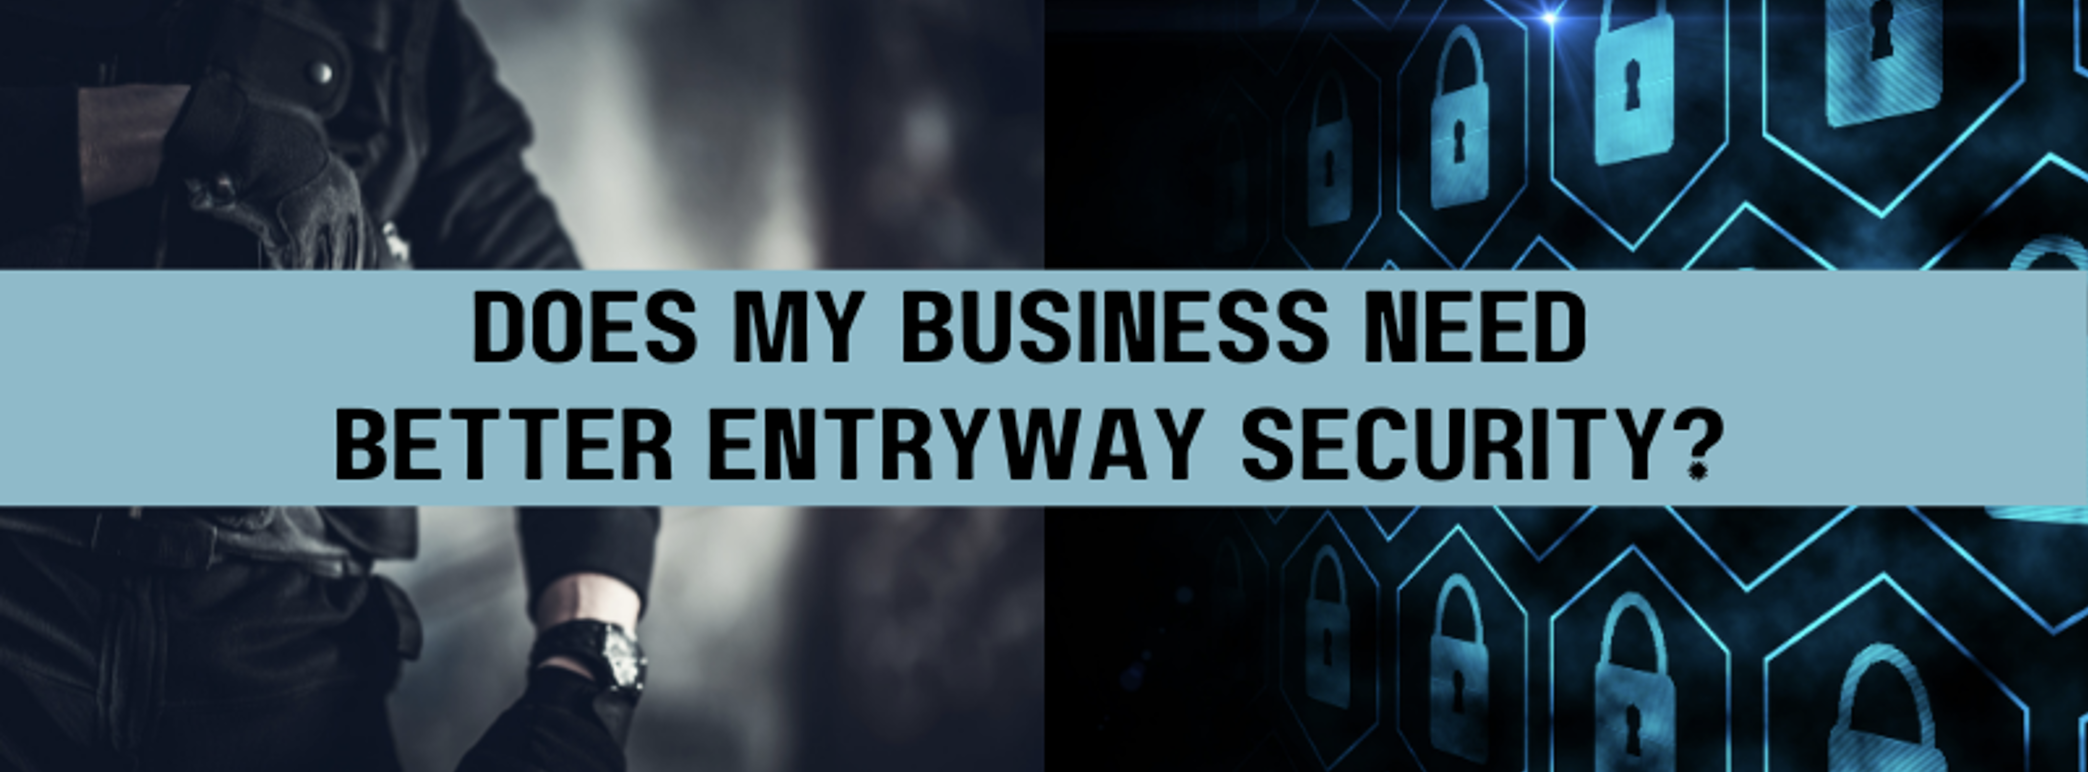 Does My Business Need Better Entryway Security?